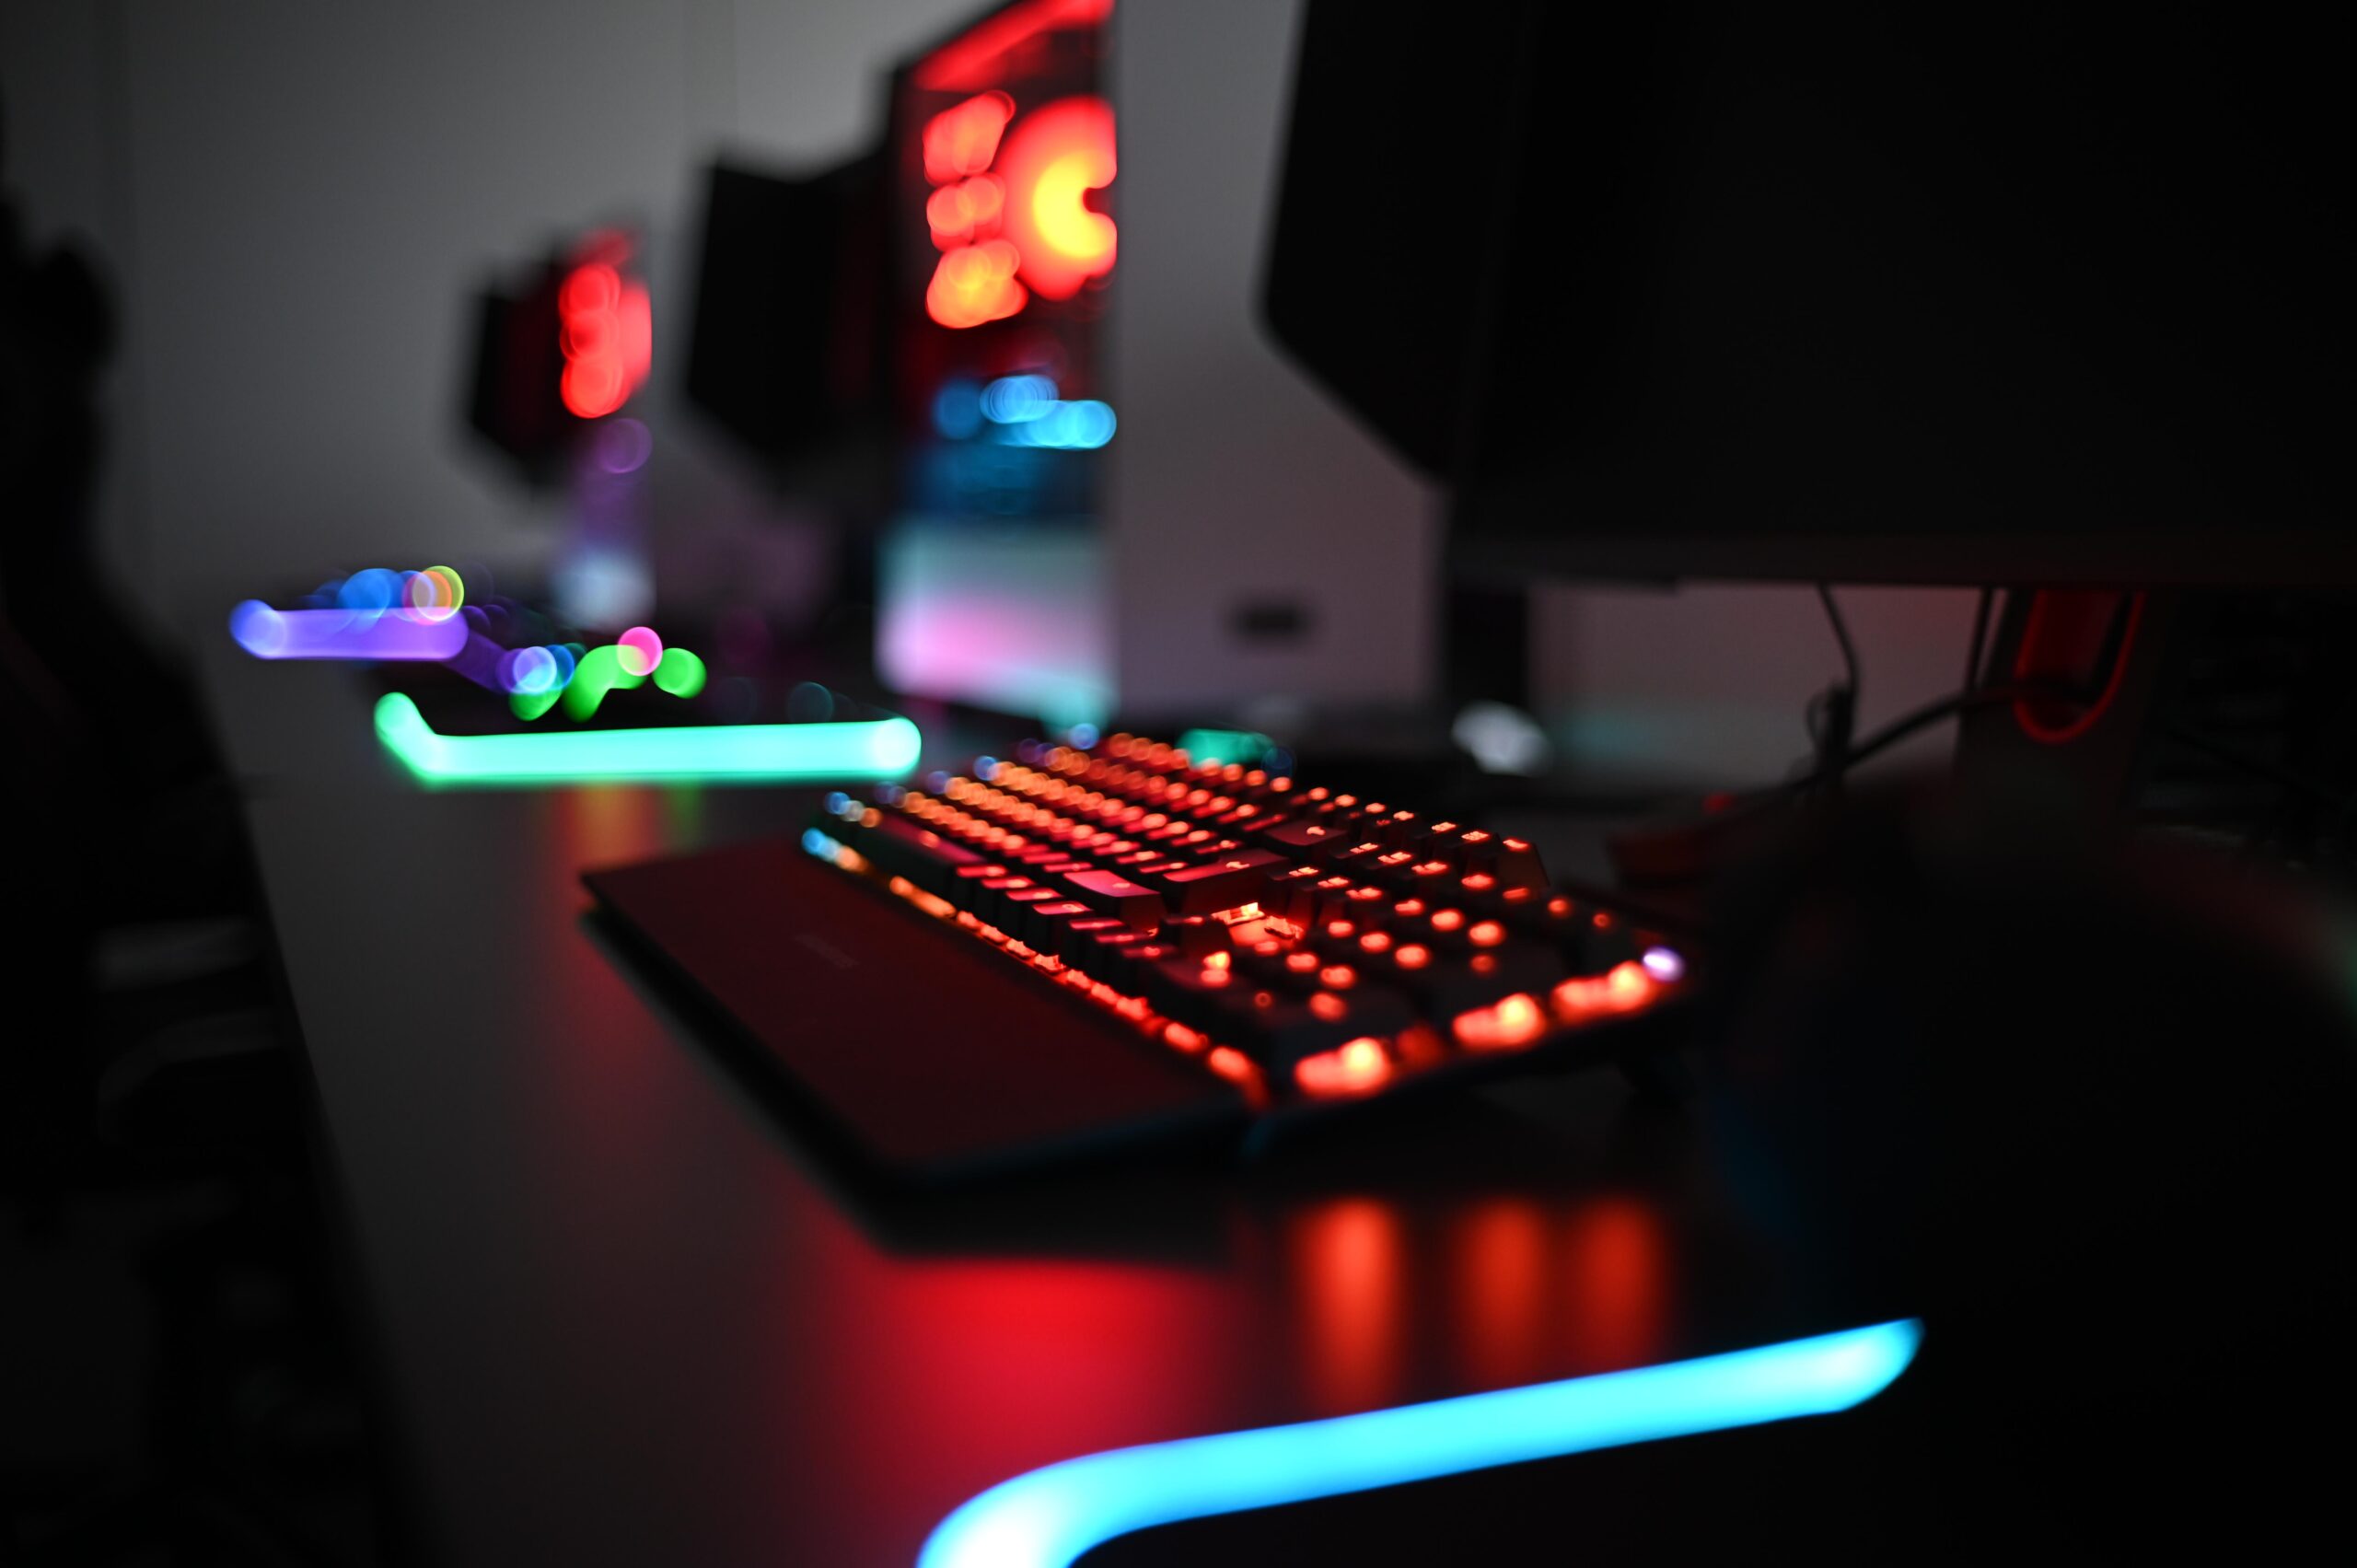 Backlit gaming keyboard and mouse set up for an esports competition.